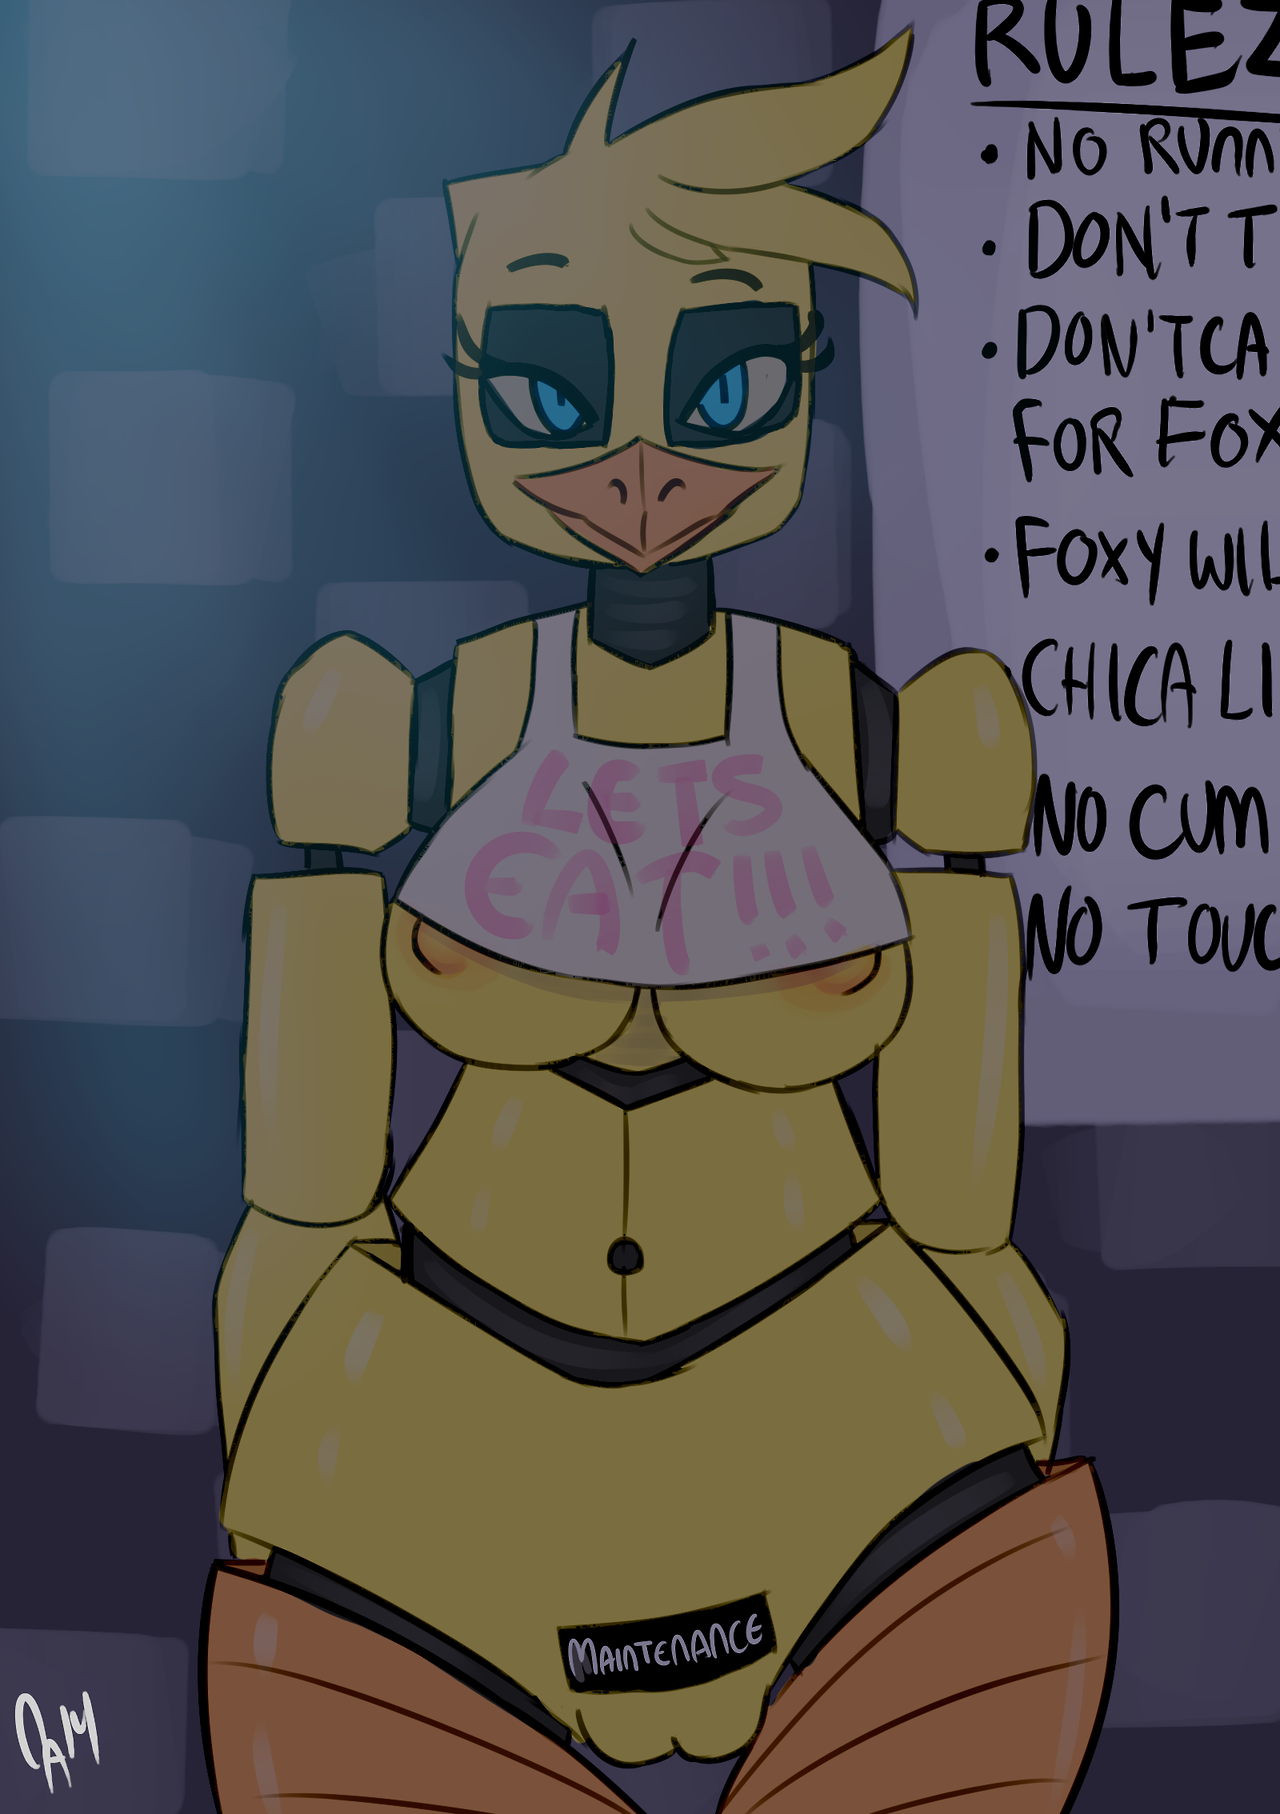 5 Nights At Freddys Chica Sexy - Post 1432223: Chica Five_Nights_at_Freddy's Somescrub